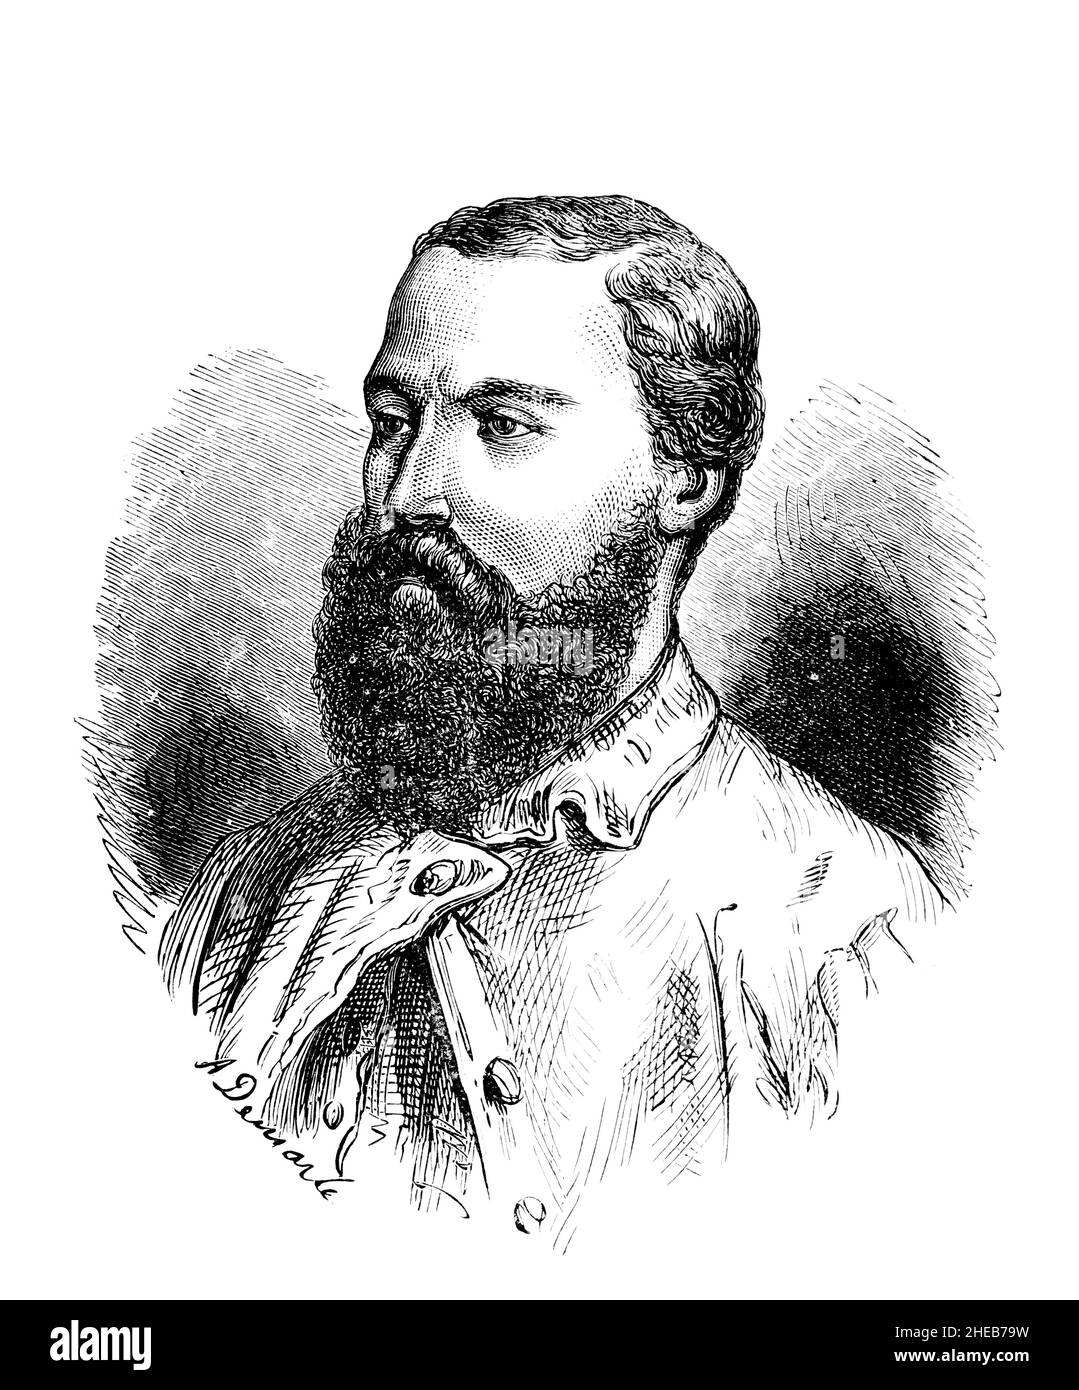 Sir Samuel White Baker, engraved illustration from African Discovery and Adventure, by C E Bourne, published in 1900 by Swan Sonnenshein & Co, London Stock Photo